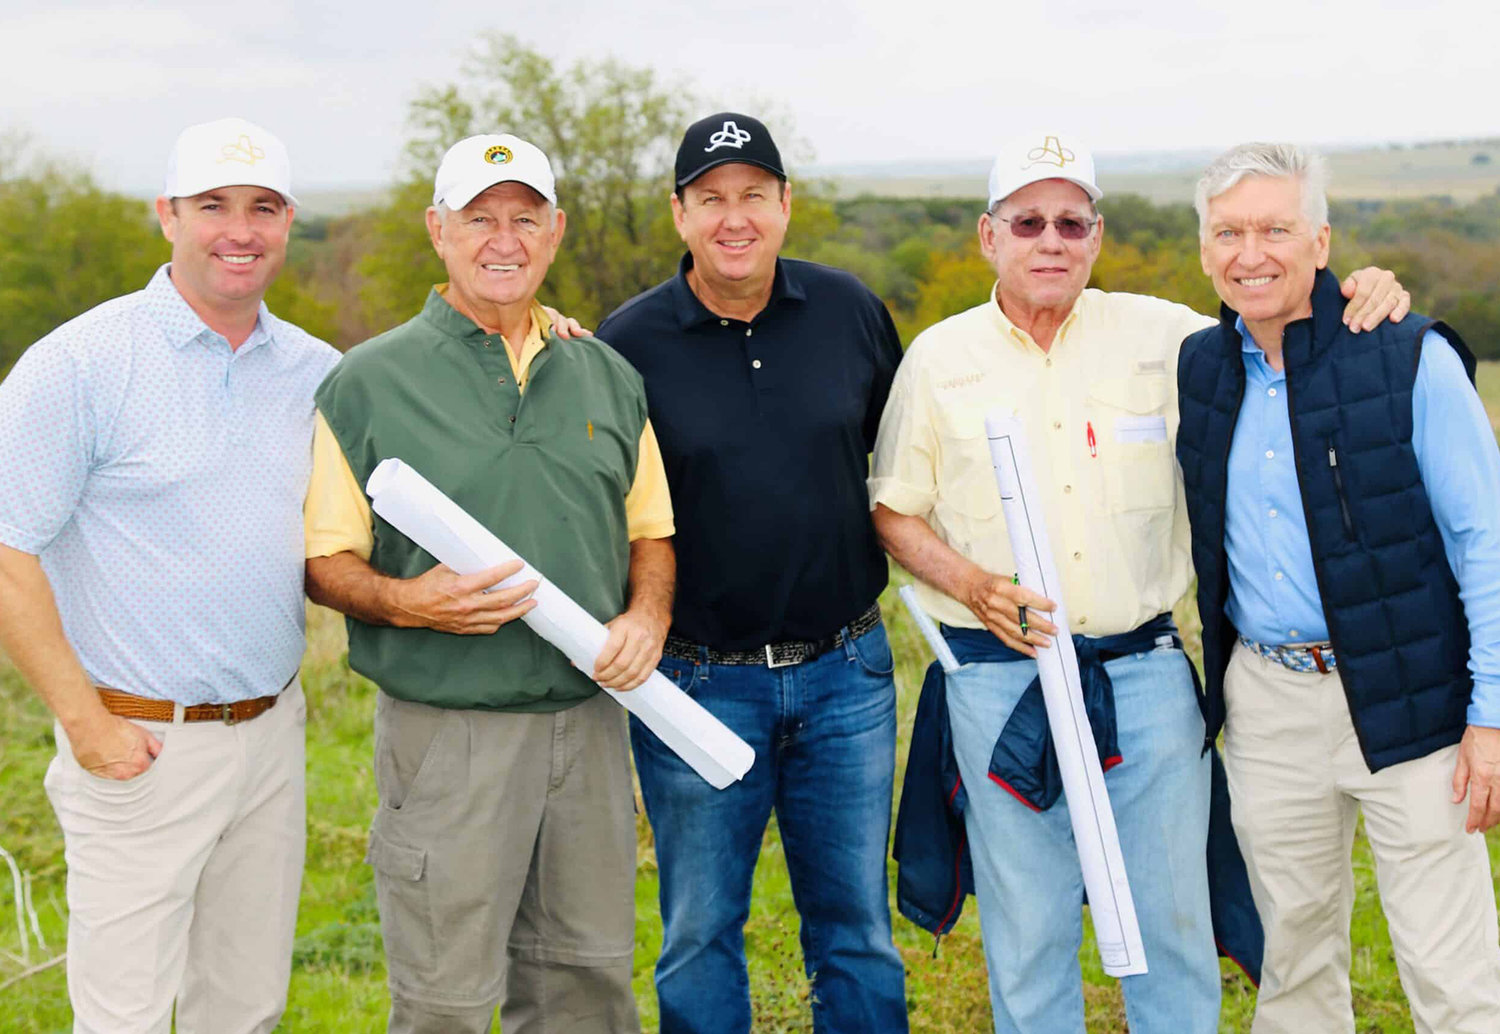 Key players in the Avanzada Golf & Ranch Club are (from left) Bubba Vann, developer; Jim Lipe, golf course architect; JJ Henry, PGA Tour player and developer; Mike Sheridan, land planner; and Gilbert Little, developer.